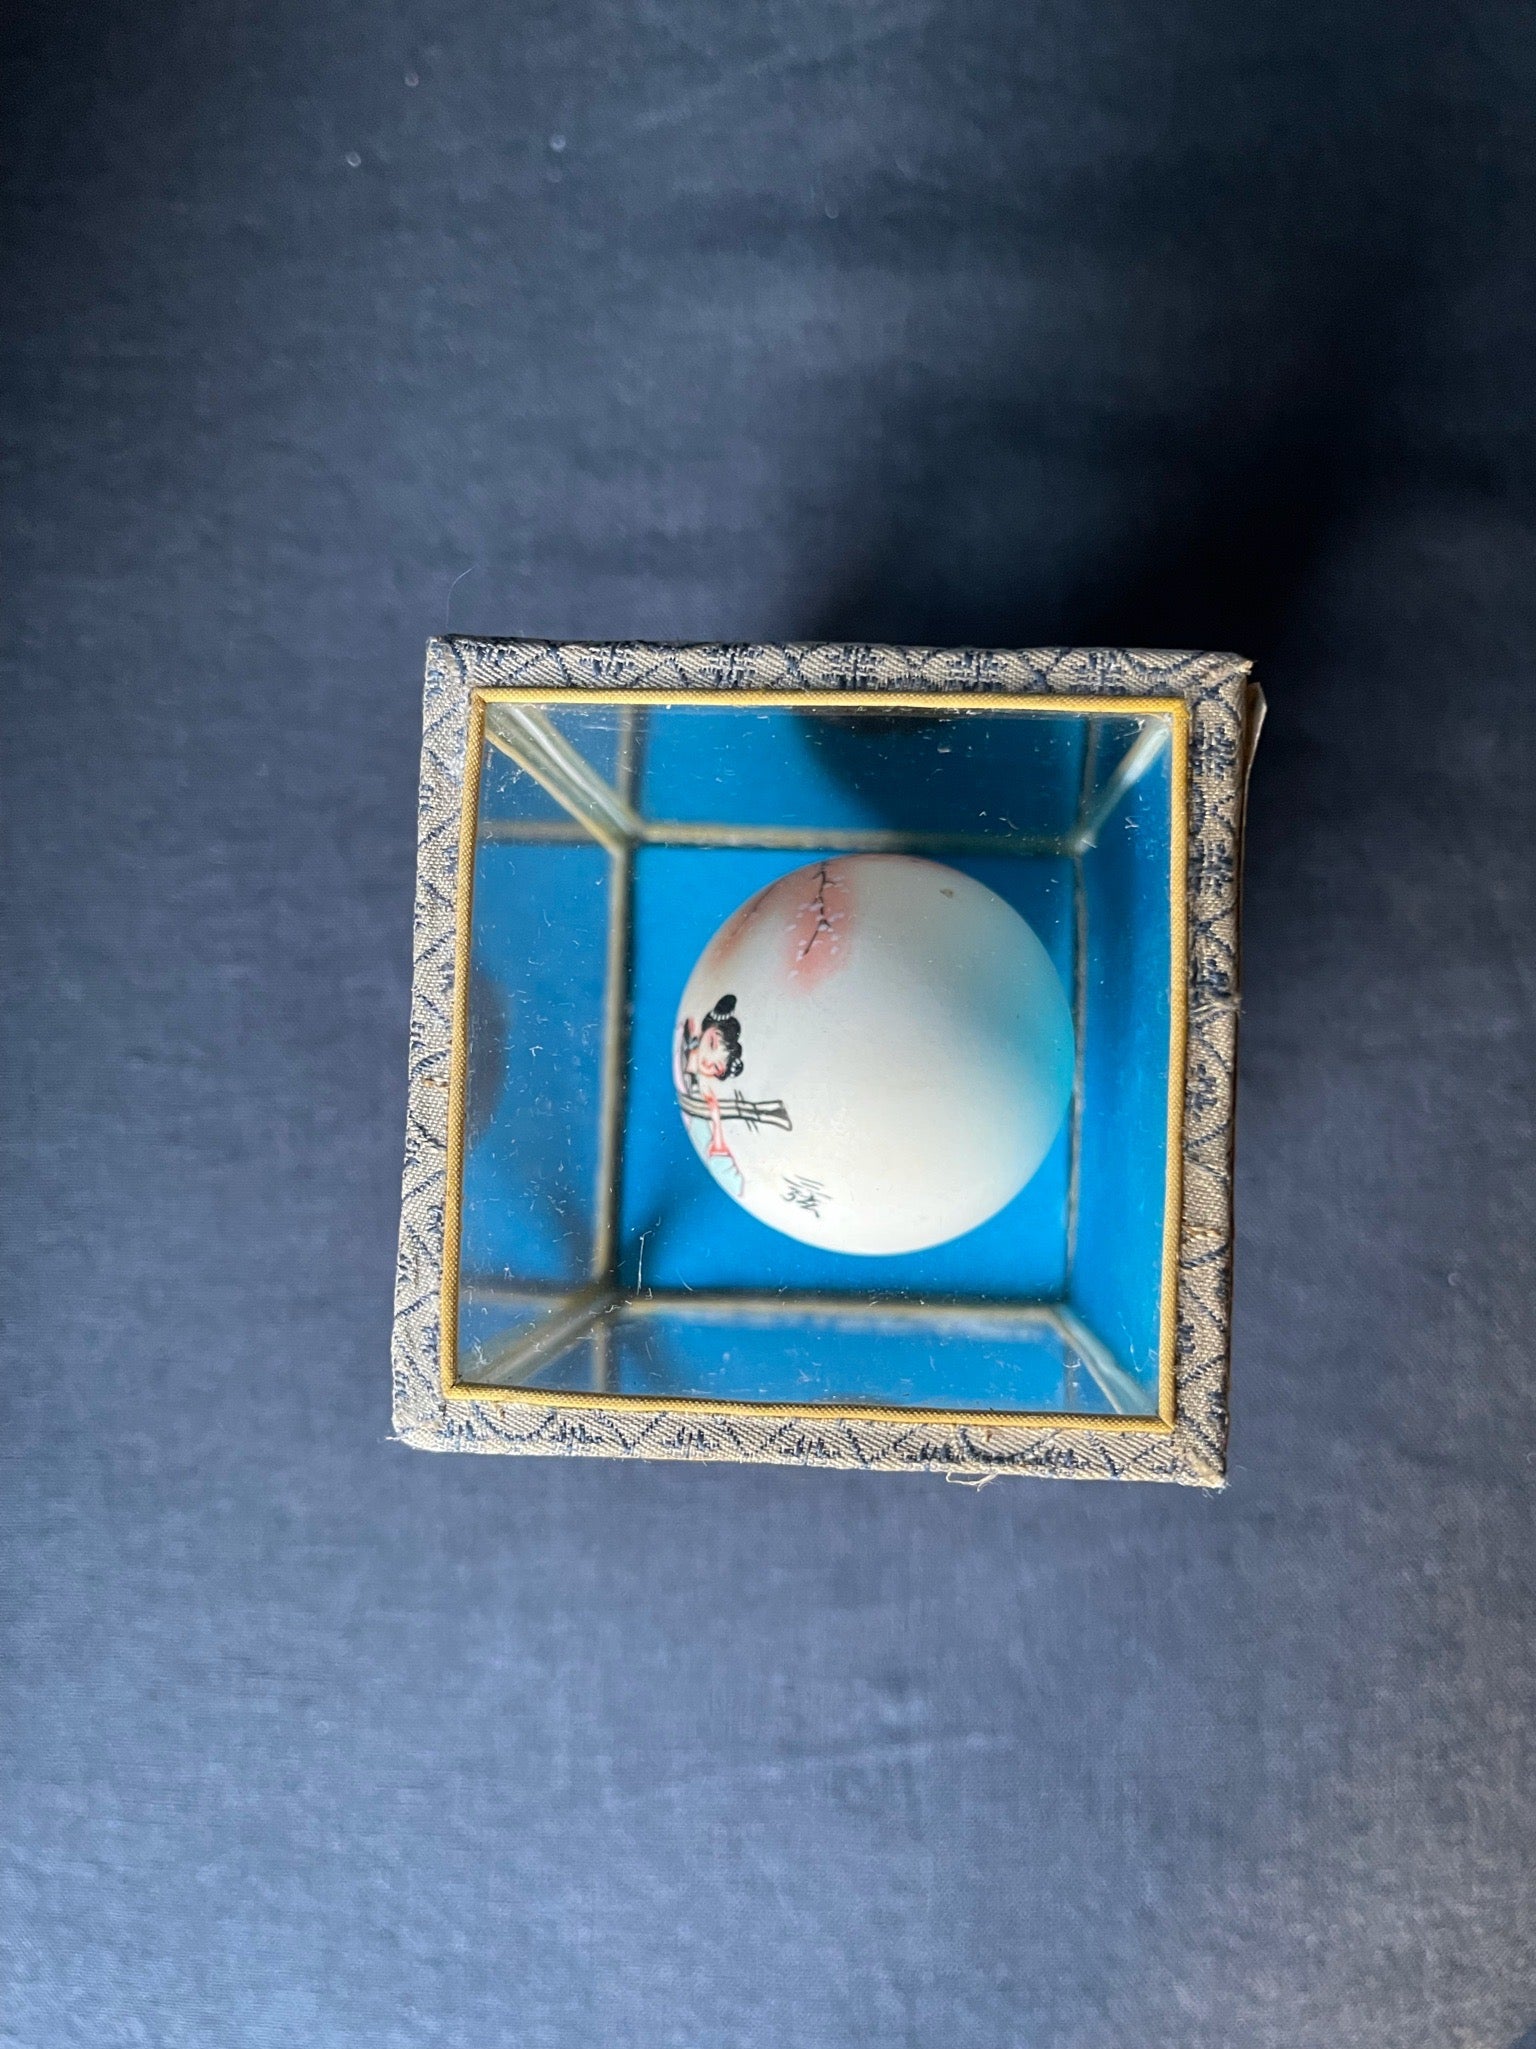 Vintage Chinese Painted Eggs - Musician